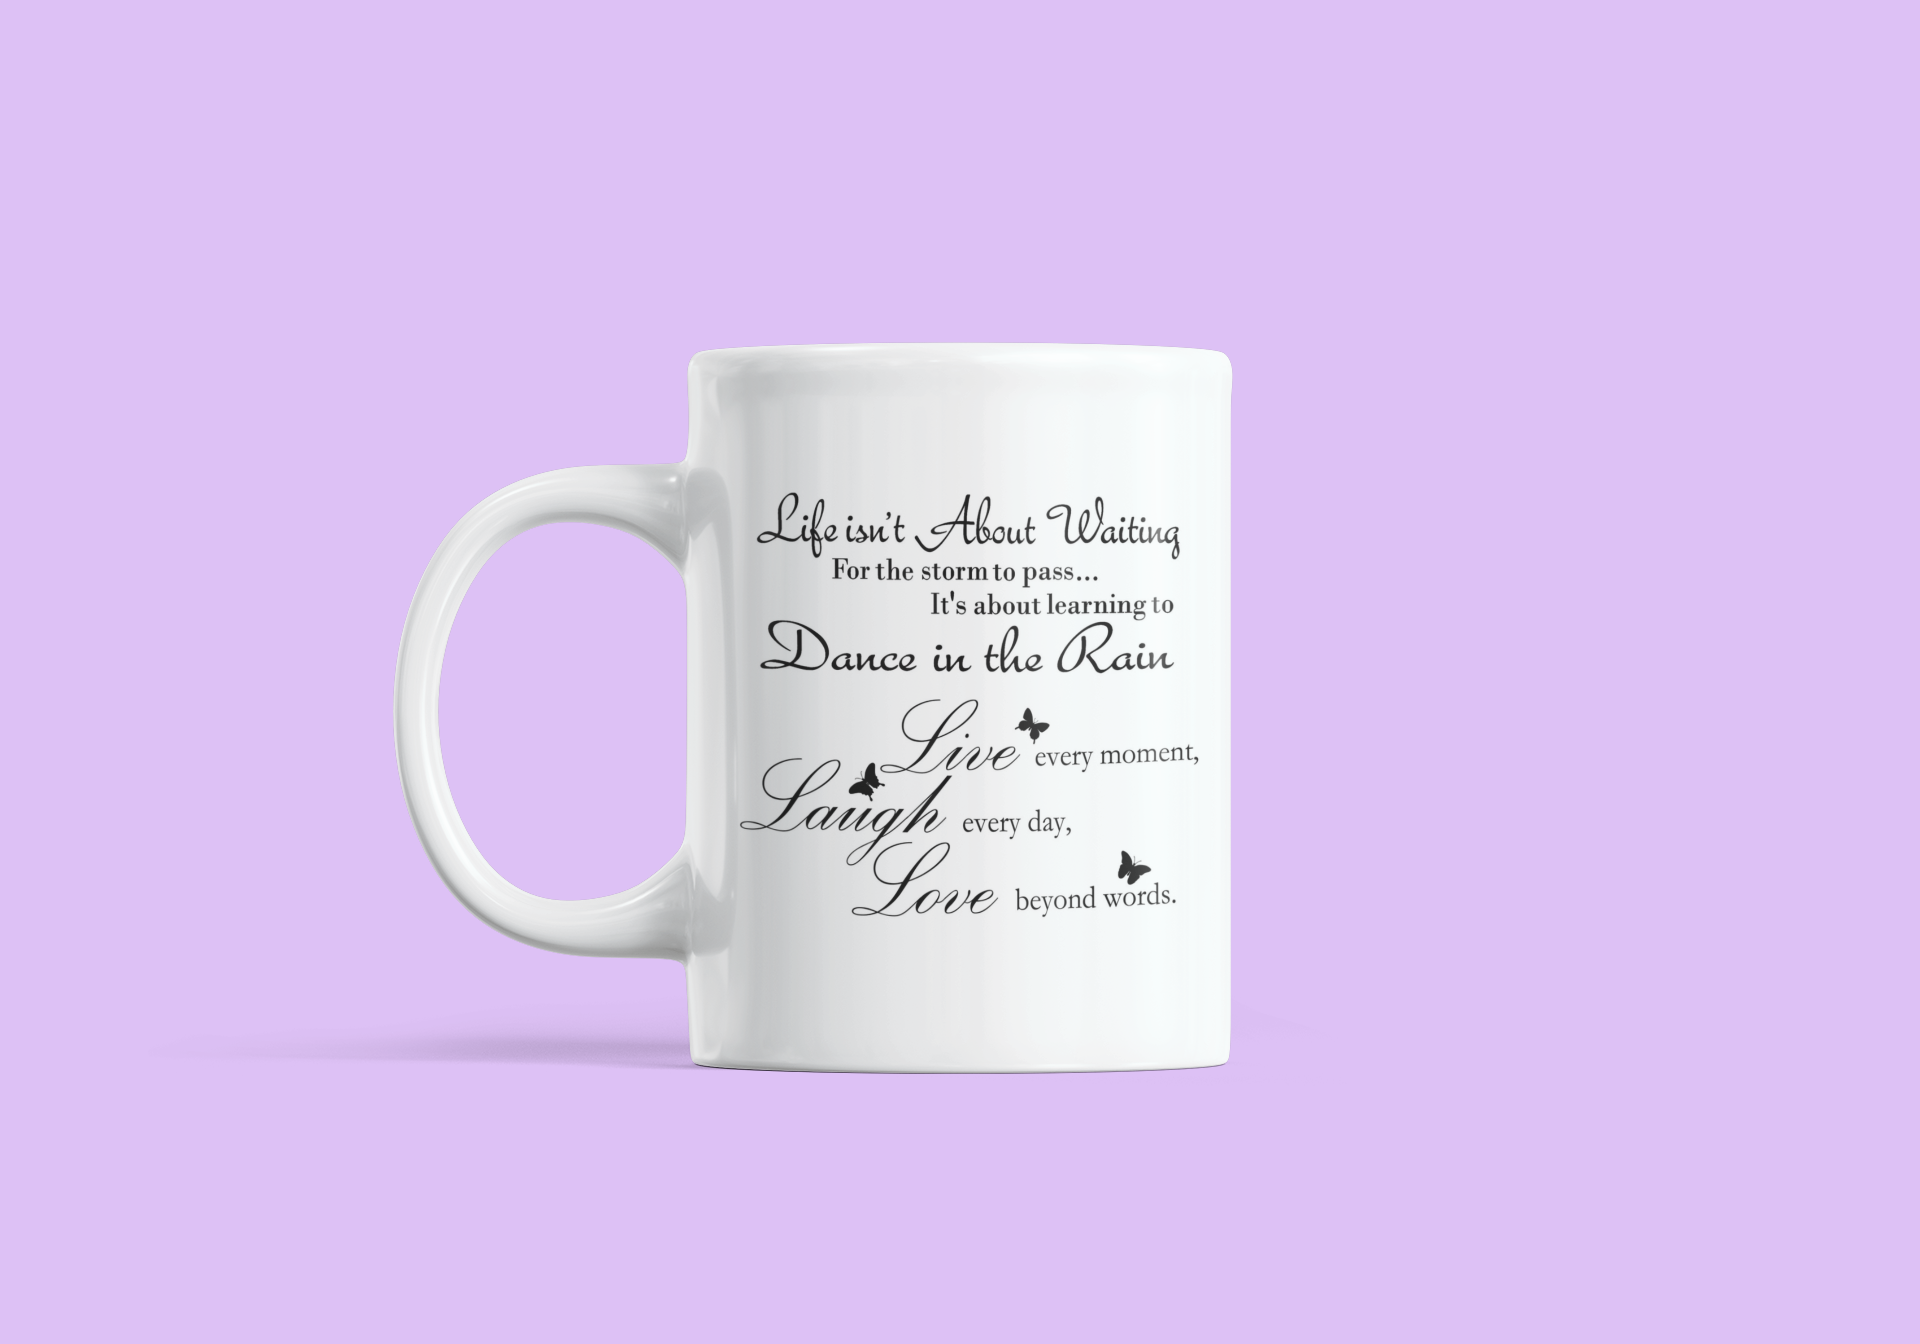 Motivation Mugs/ Can be customized on other side.